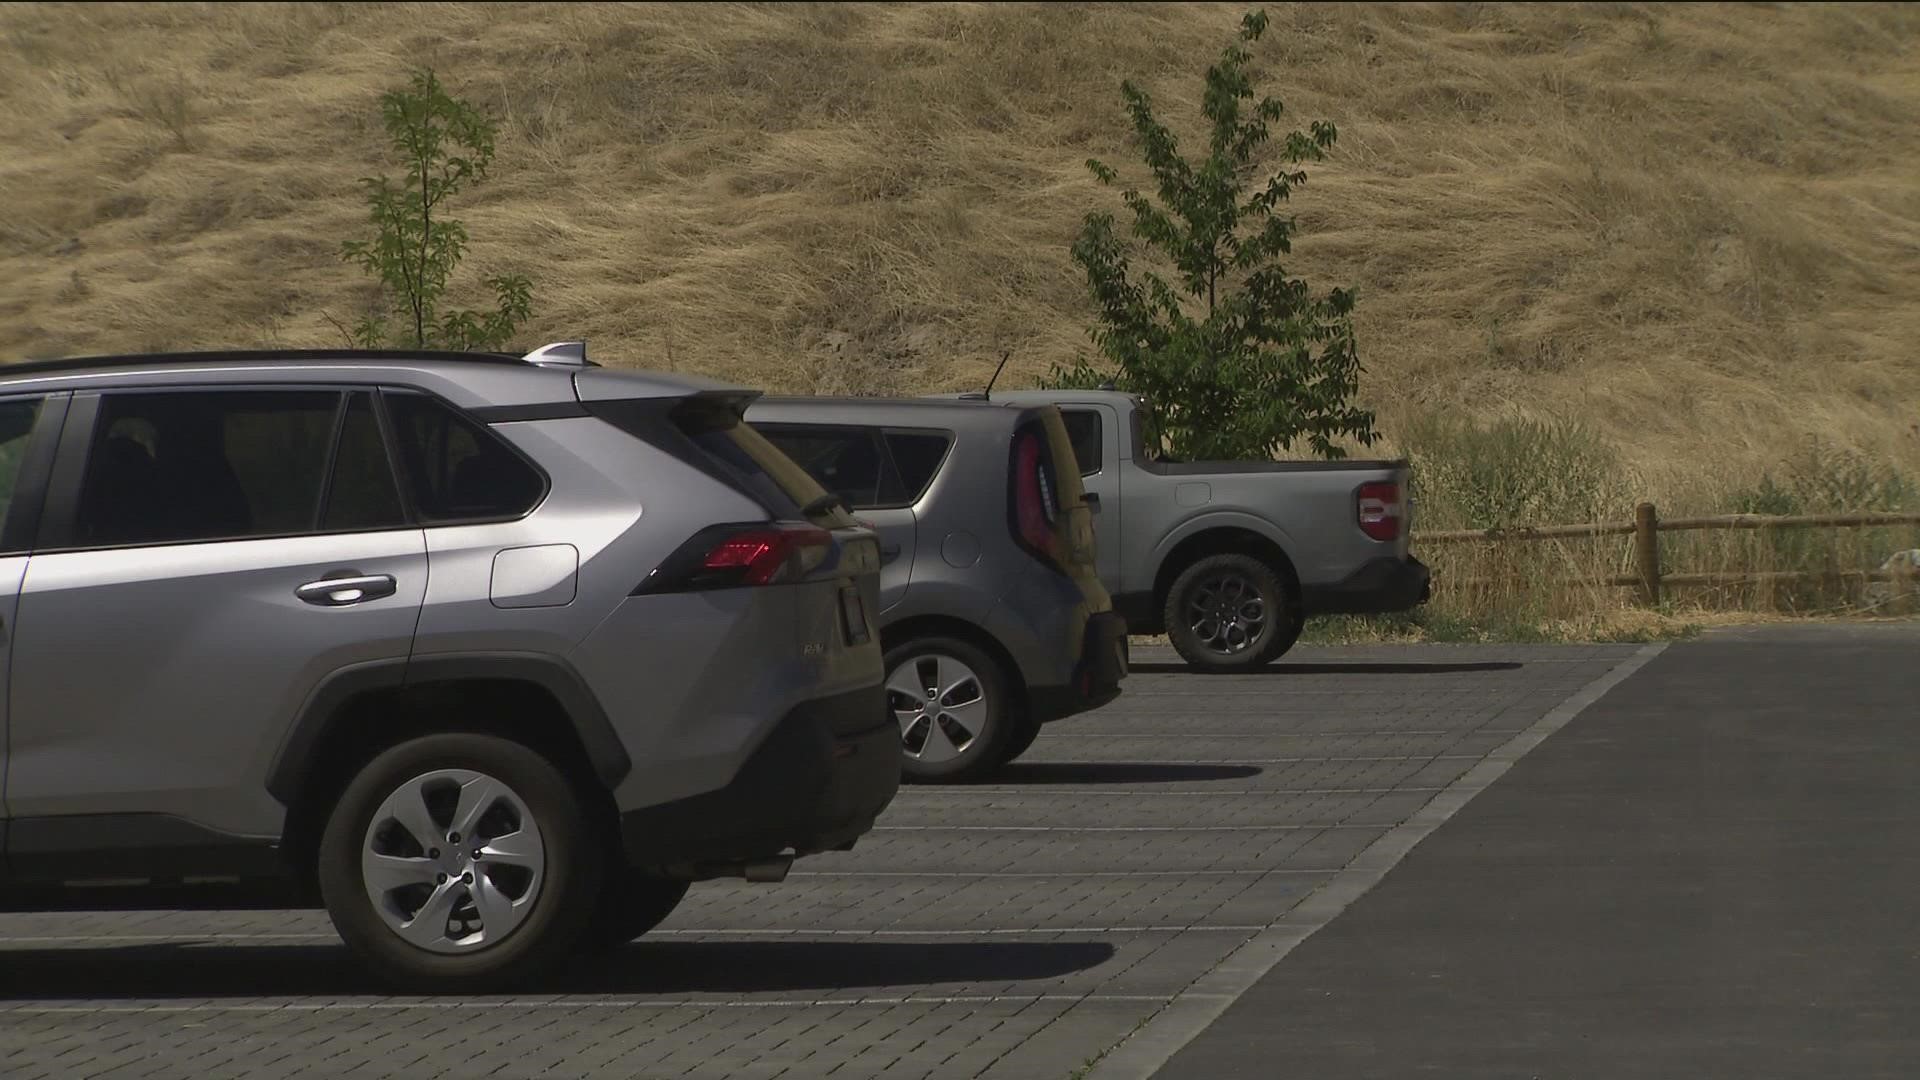 There have been 12 car break-ins at trailheads reported to the Boise Police this year, a number financial crimes detective Brad Thorne said is fairly typical.